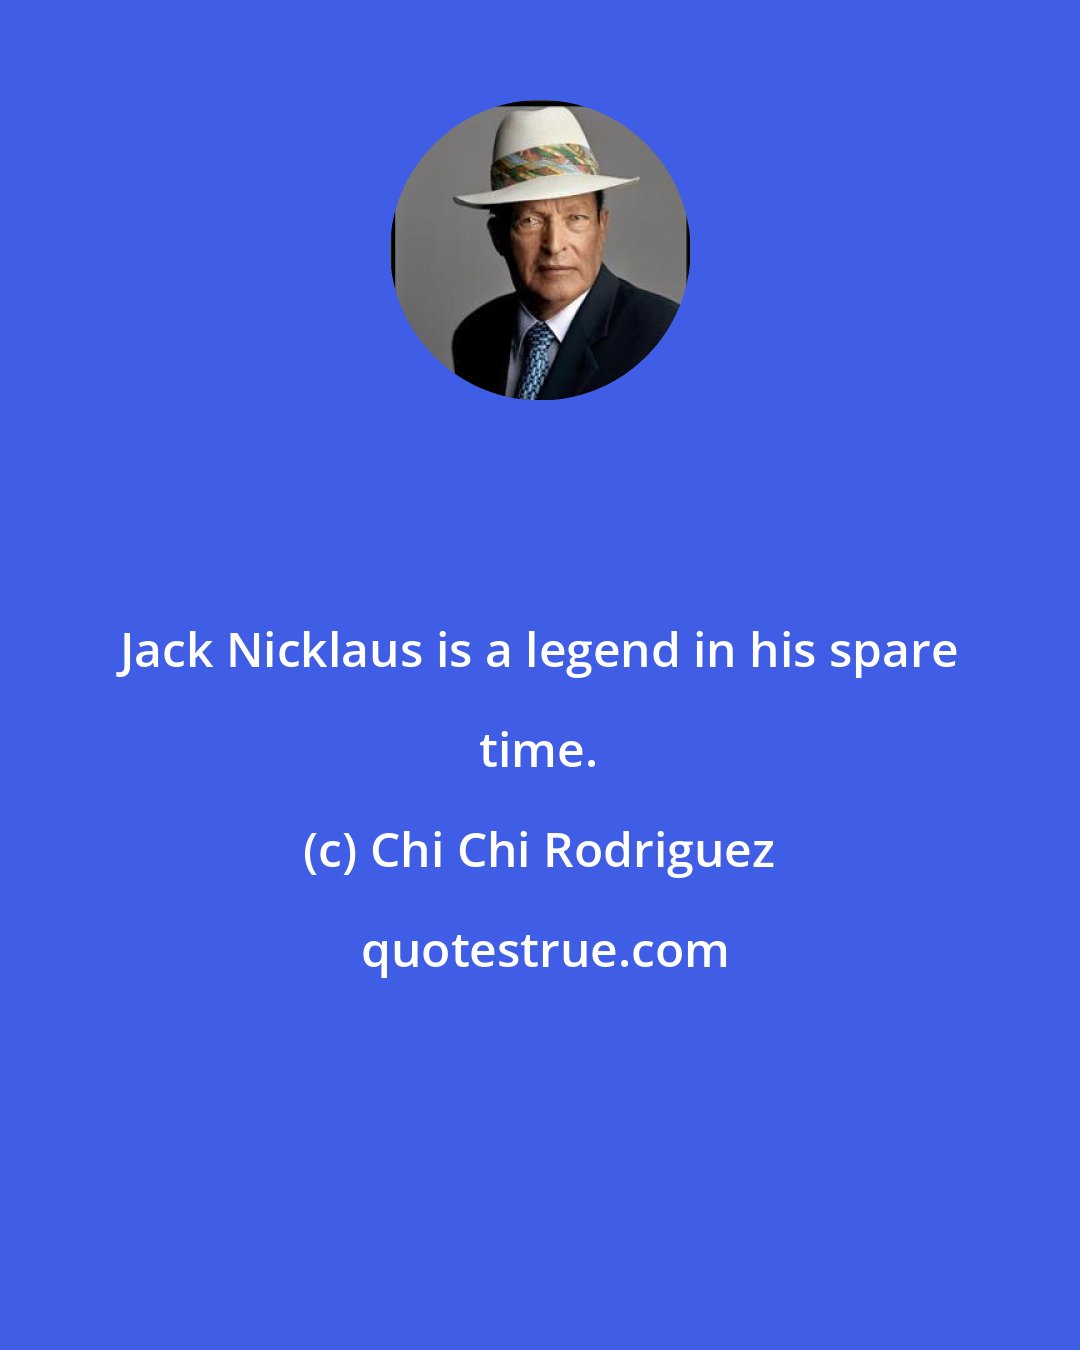 Chi Chi Rodriguez: Jack Nicklaus is a legend in his spare time.